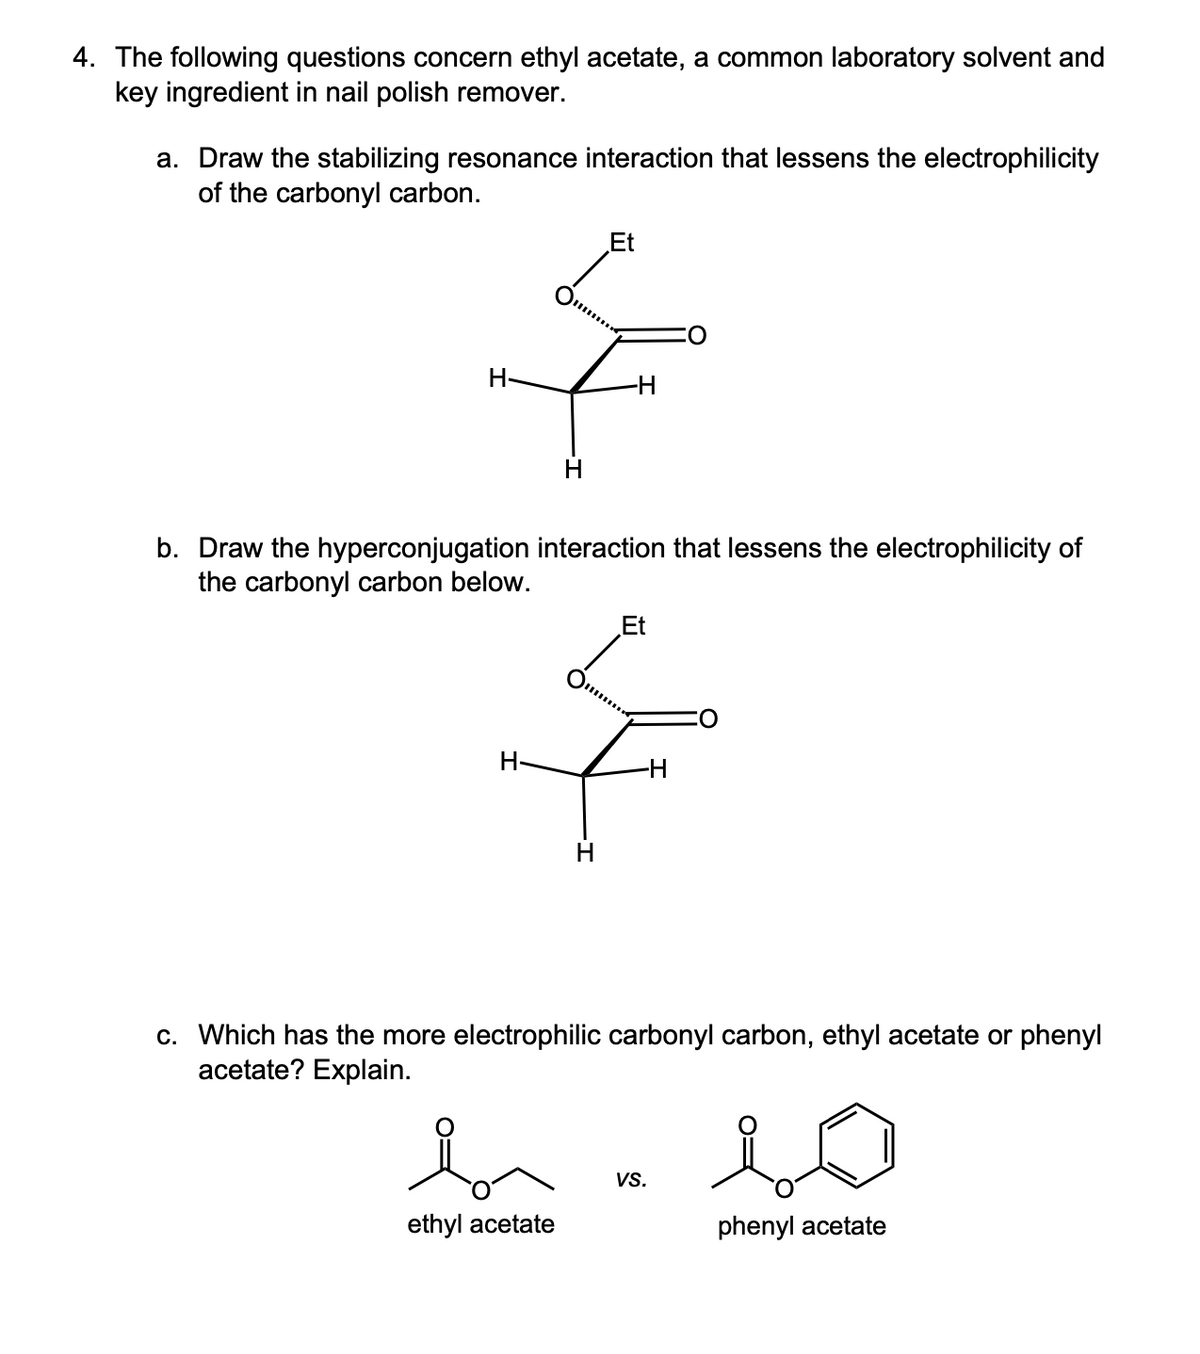 4. The following questions concern ethyl acetate, a common laboratory solvent and
key ingredient in nail polish remover.
a. Draw the stabilizing resonance interaction that lessens the electrophilicity
of the carbonyl carbon.
H-
H
Et
b. Draw the hyperconjugation interaction that lessens the electrophilicity of
the carbonyl carbon below.
H-
Et
c. Which has the more electrophilic carbonyl carbon, ethyl acetate or phenyl
acetate? Explain.
io
VS.
ethyl acetate
phenyl acetate